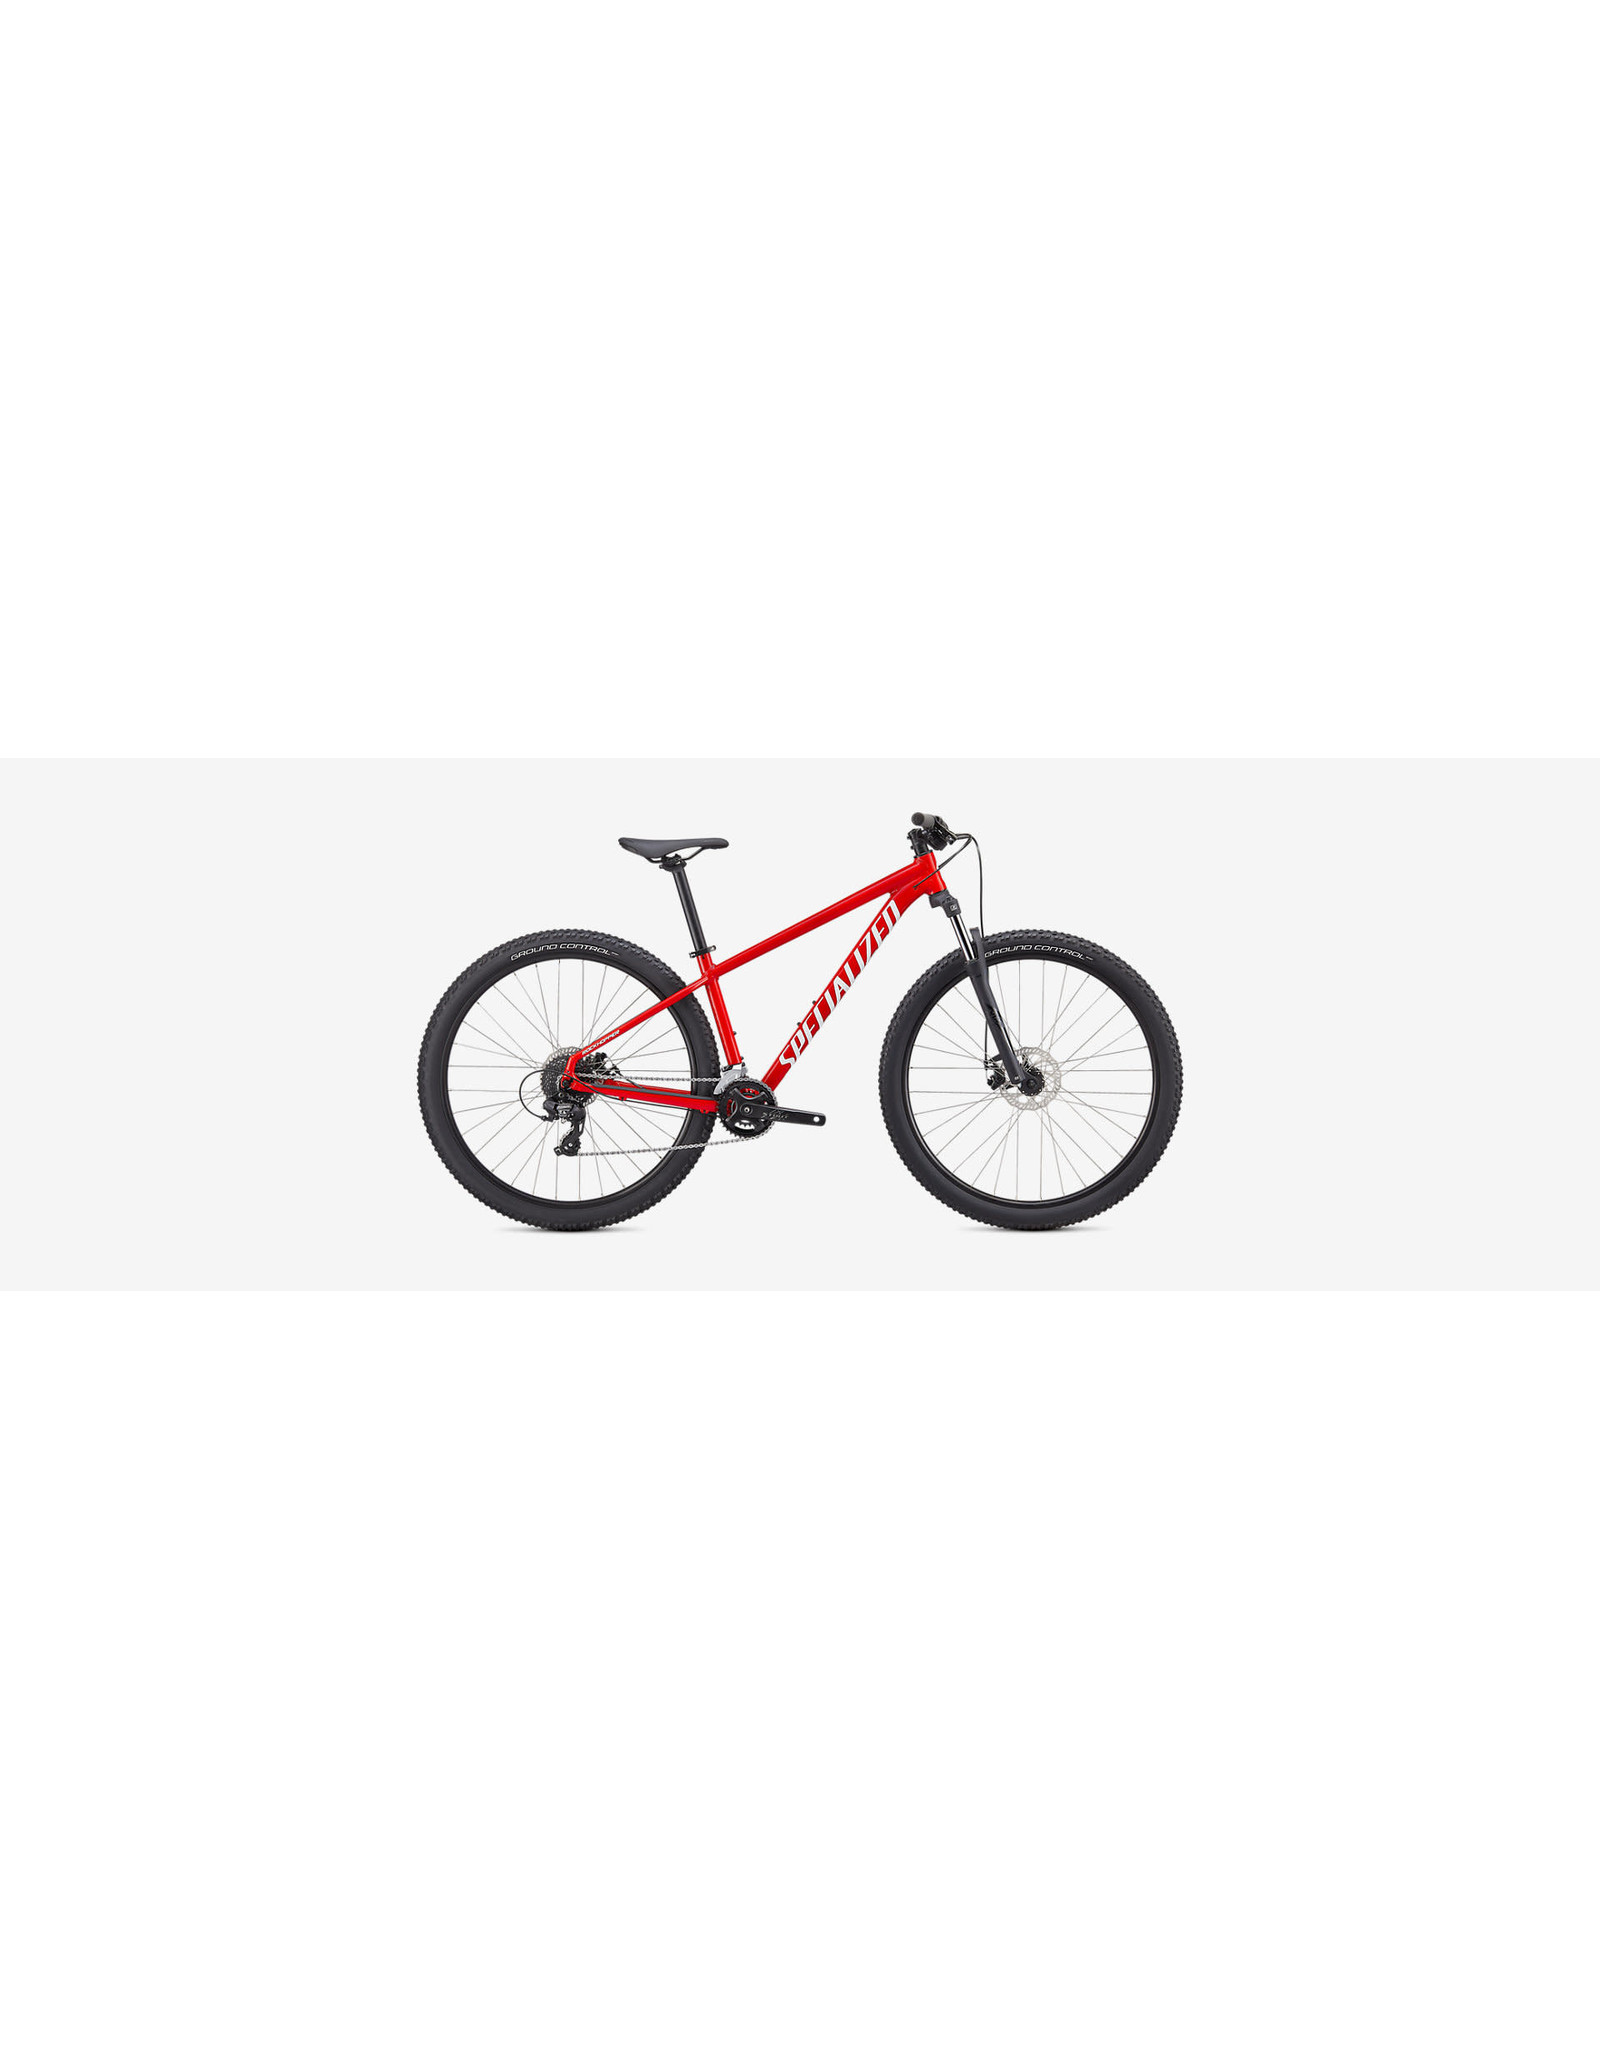 Specialized 2021 ROCKHOPPER 27.5 - Flo Red/White  Small